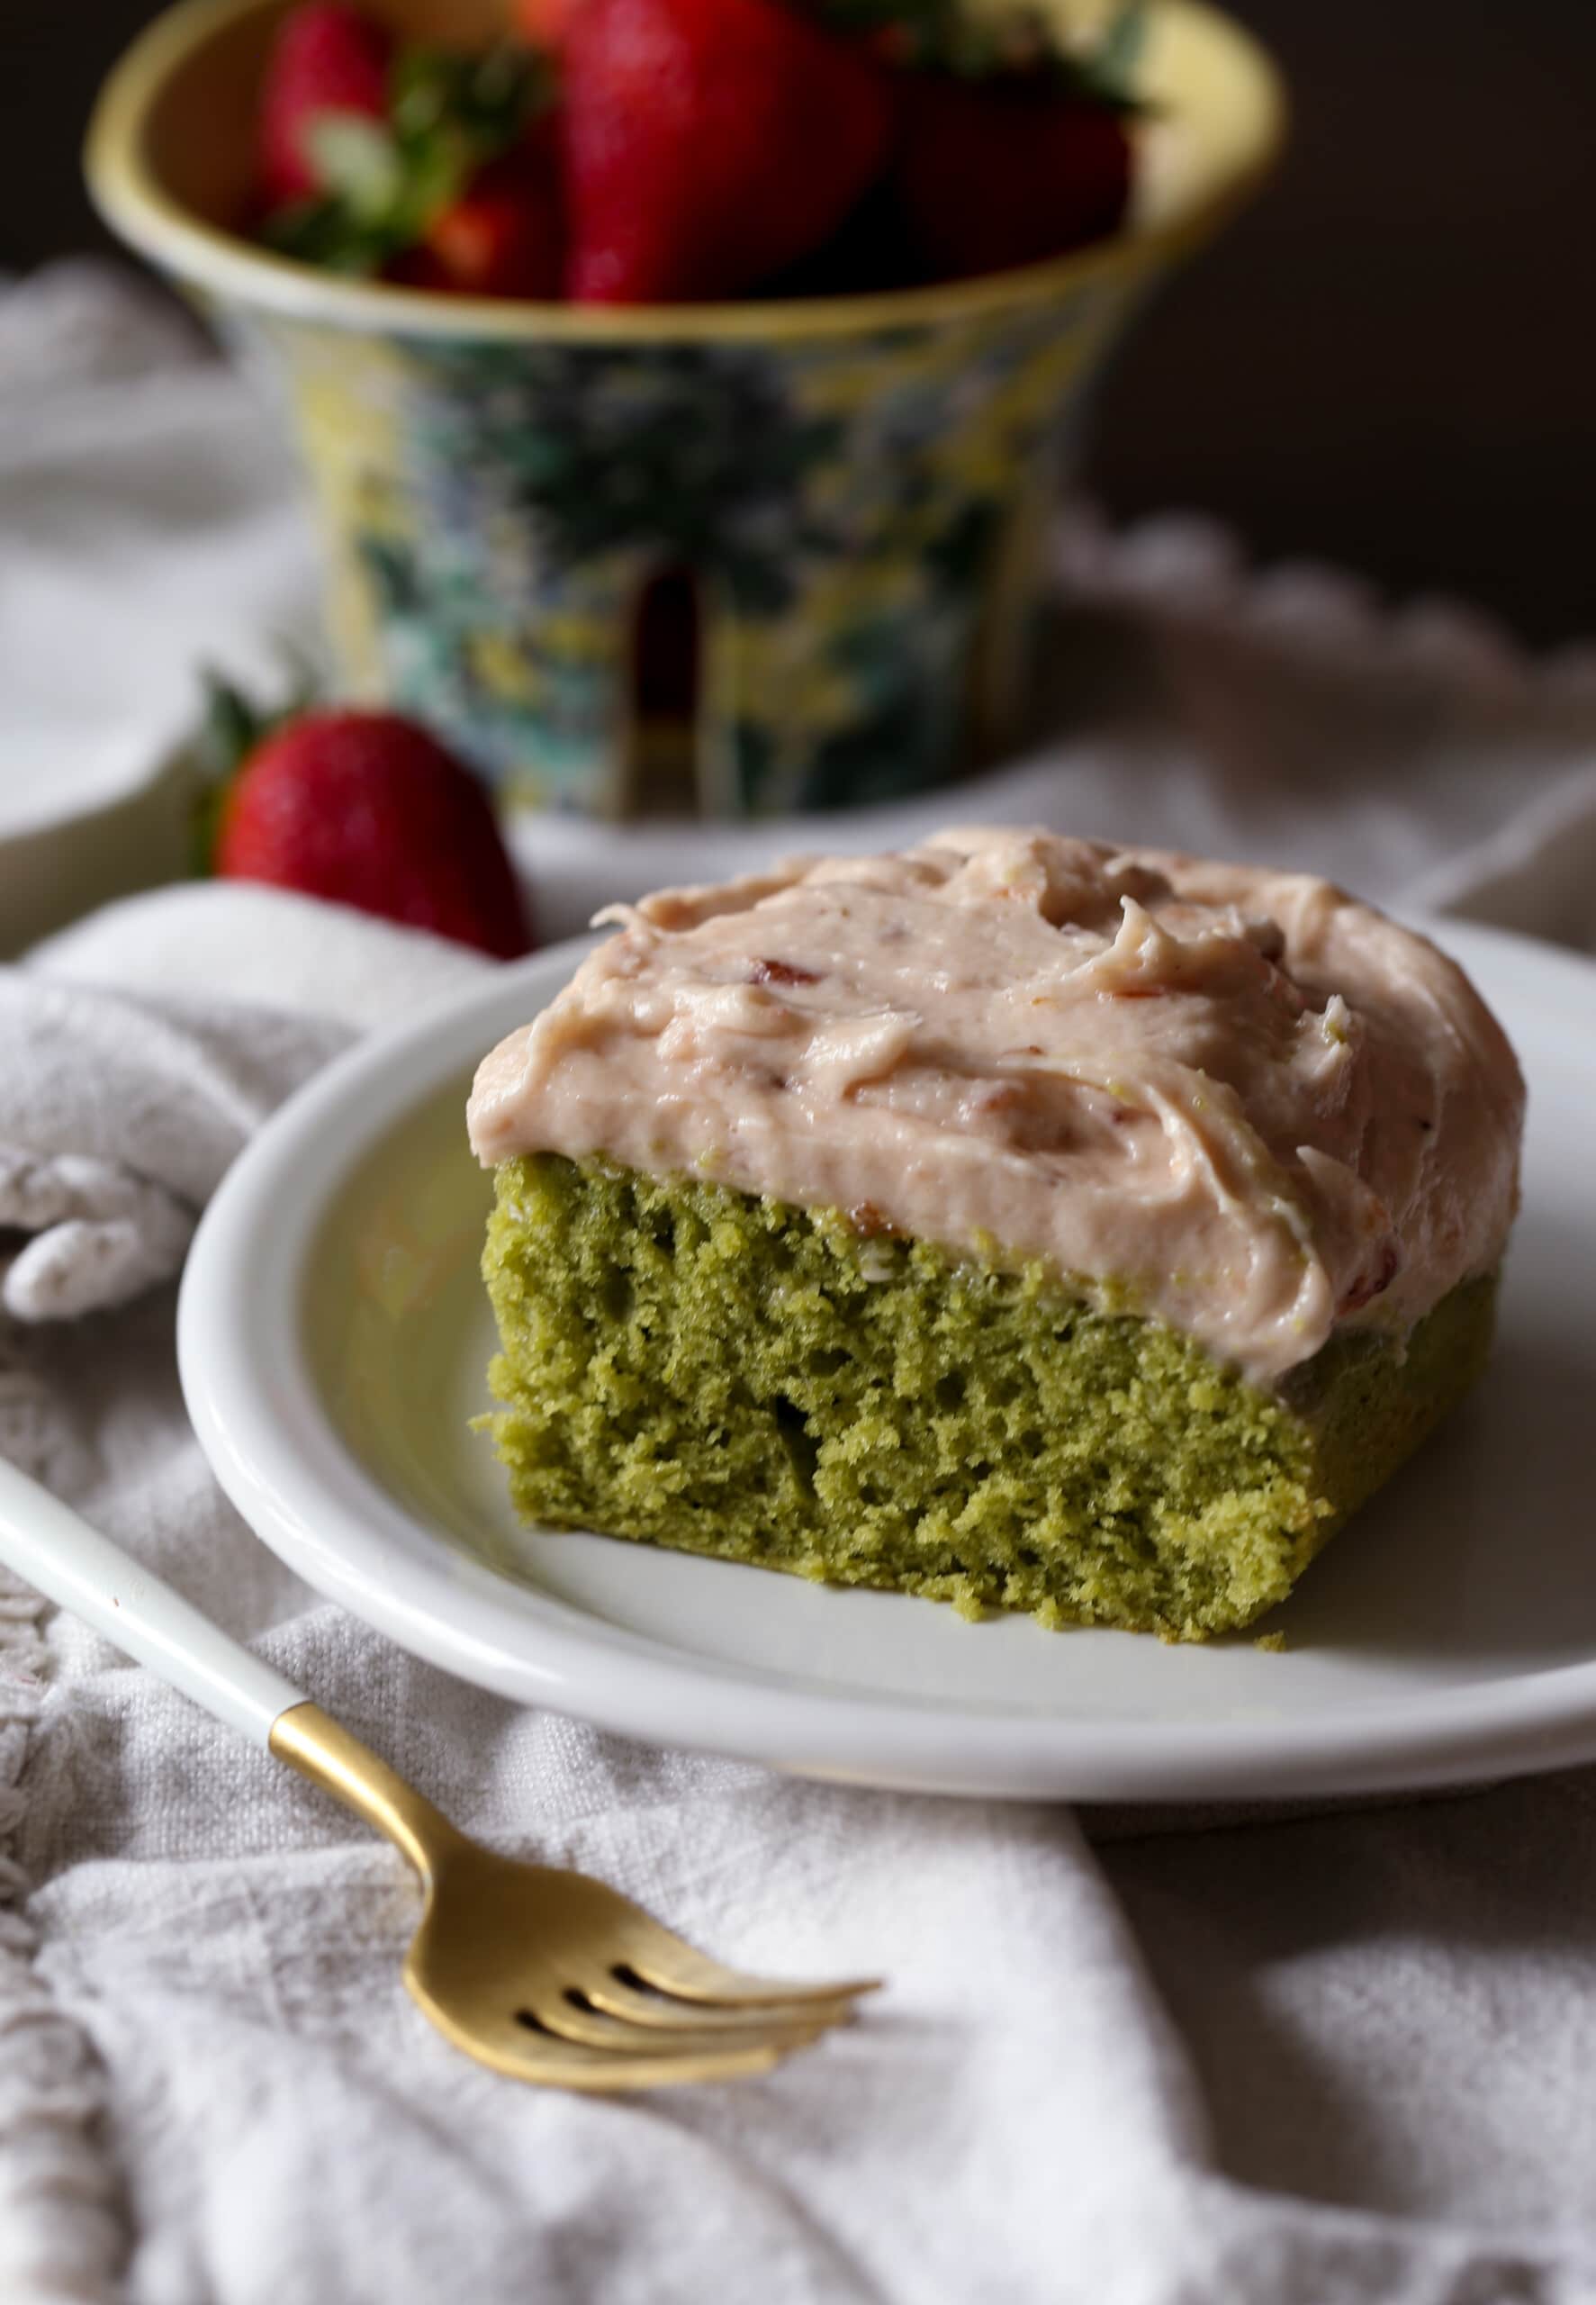 matcha green tea cake with strawberry frosting